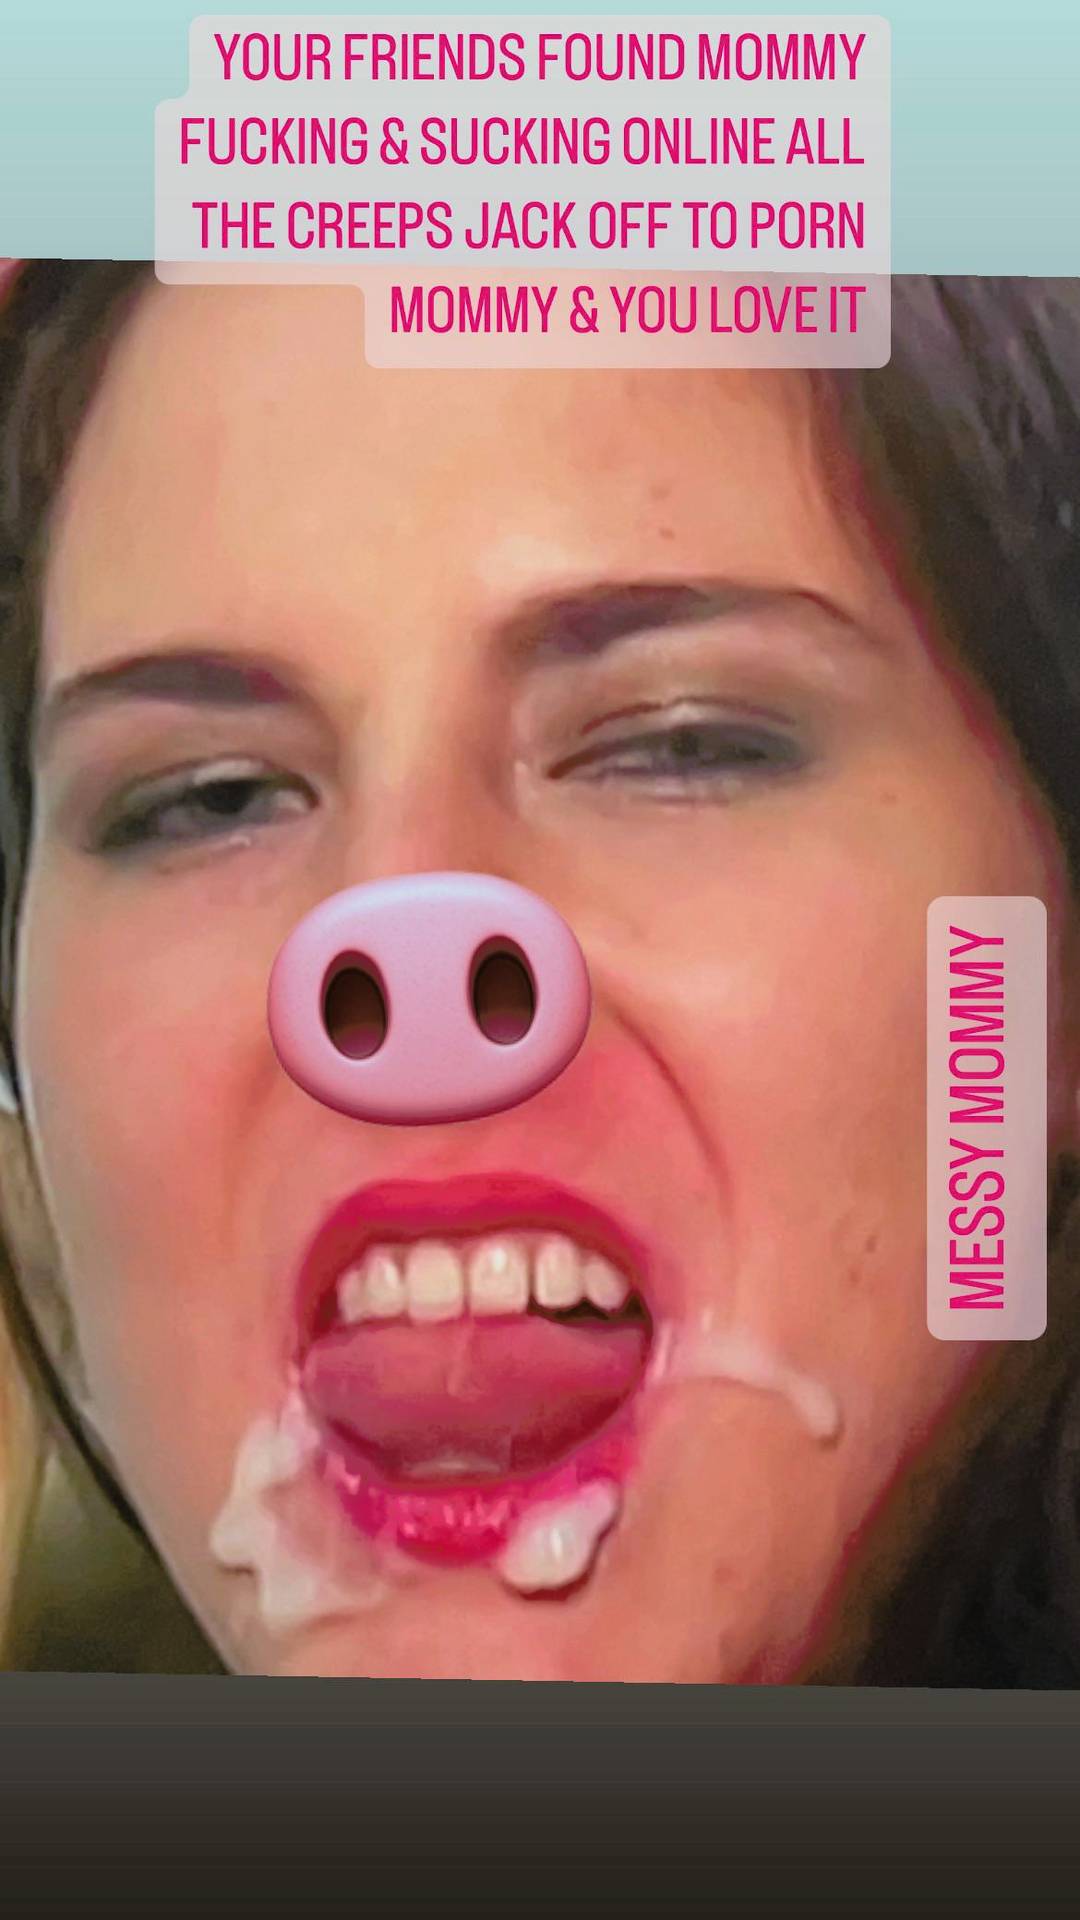 1080px x 1920px - Jacking Off To this porn pig whore! 3.2 thousand dicks she's def a used  Cunt since she's family I'm going to Nevada 2 use her Whore Hole with  buddies | Scrolller